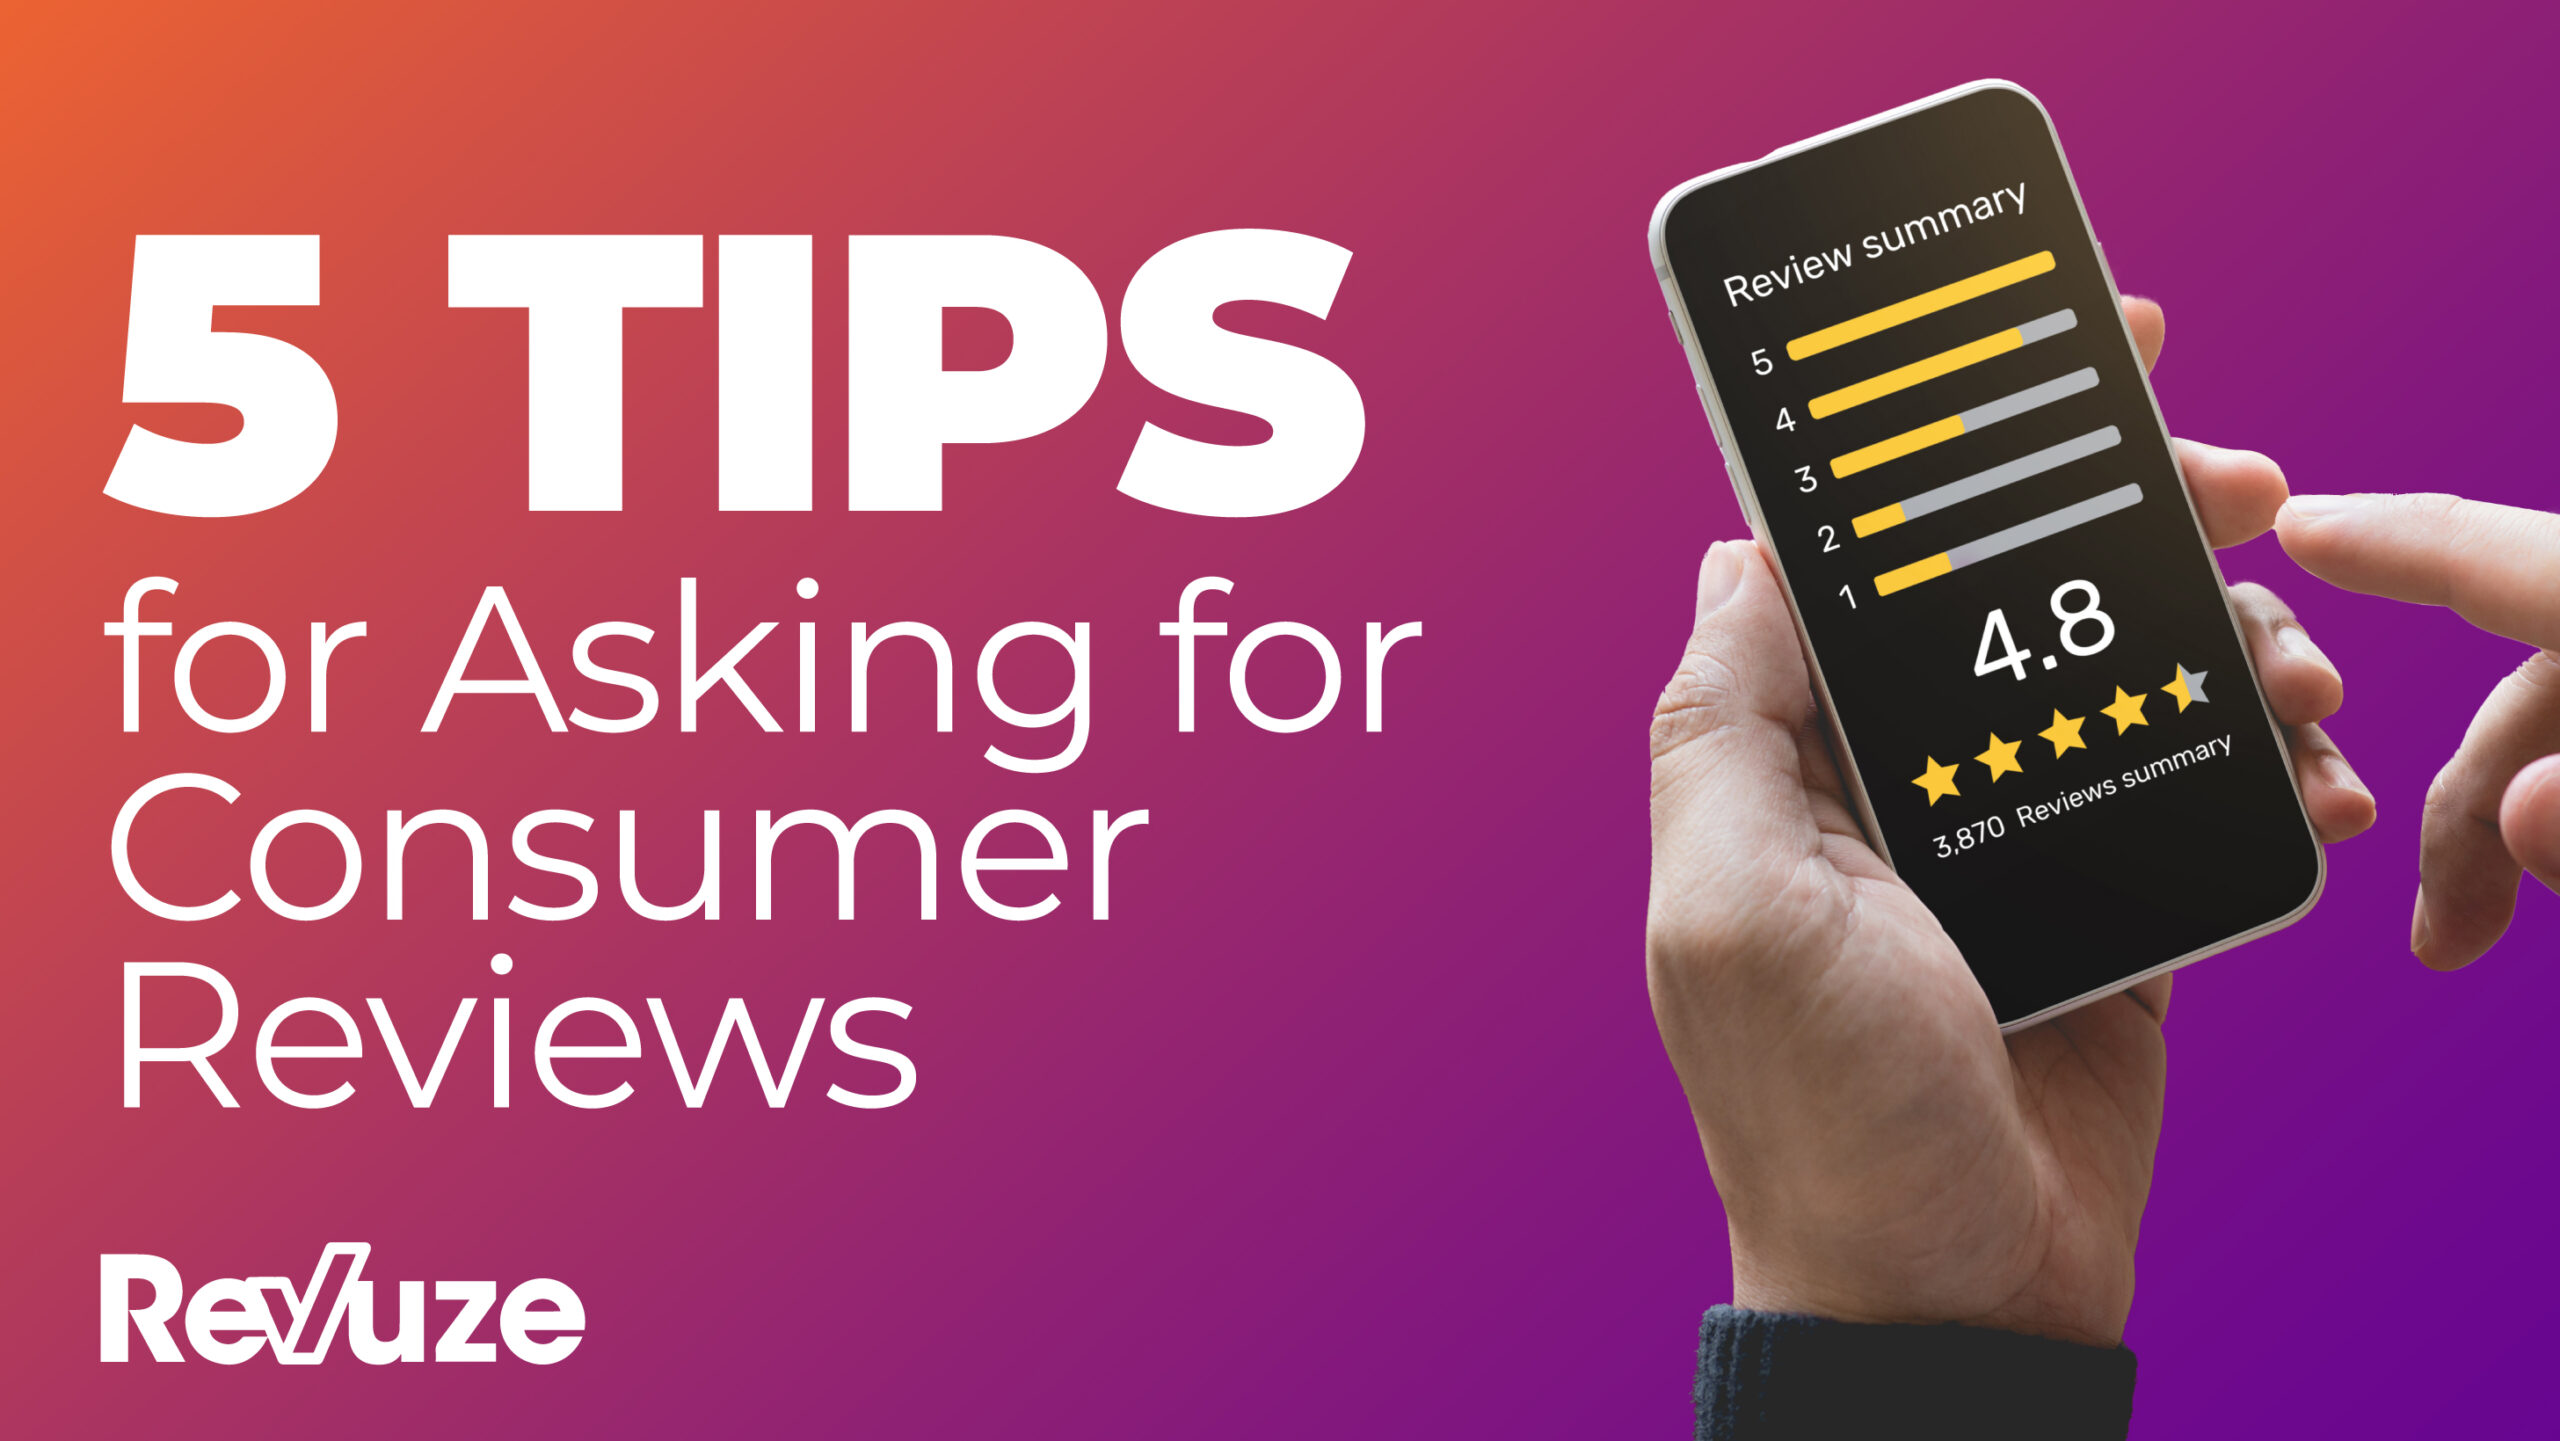 5 Tips for Asking for Consumer Reviews